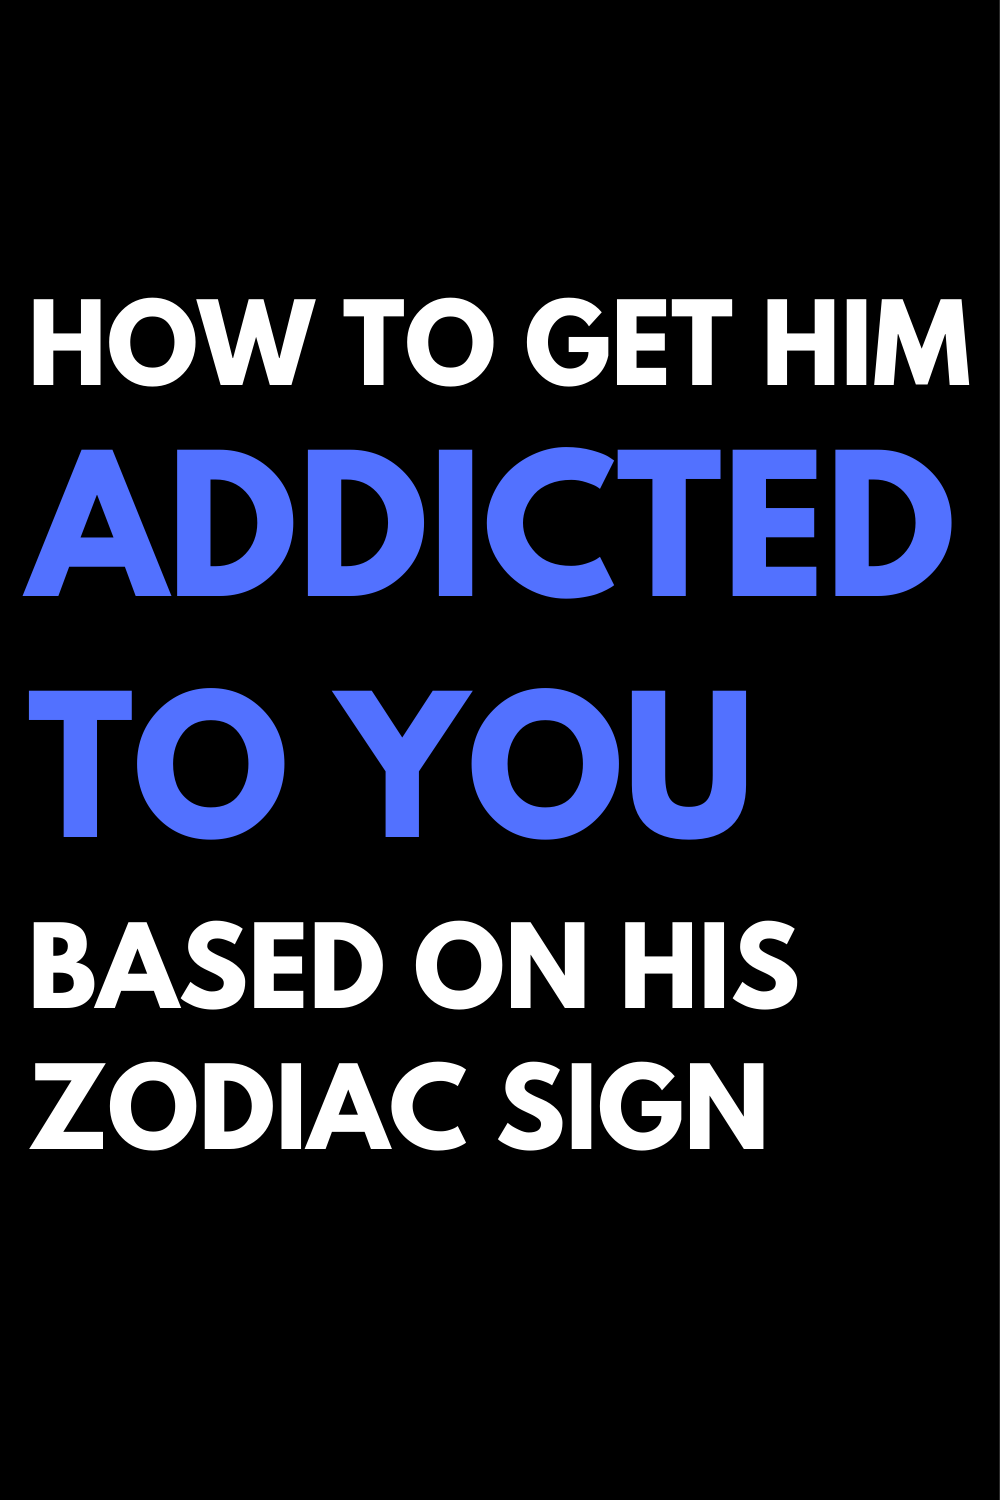 How to get him addicted to you based on his zodiac sign